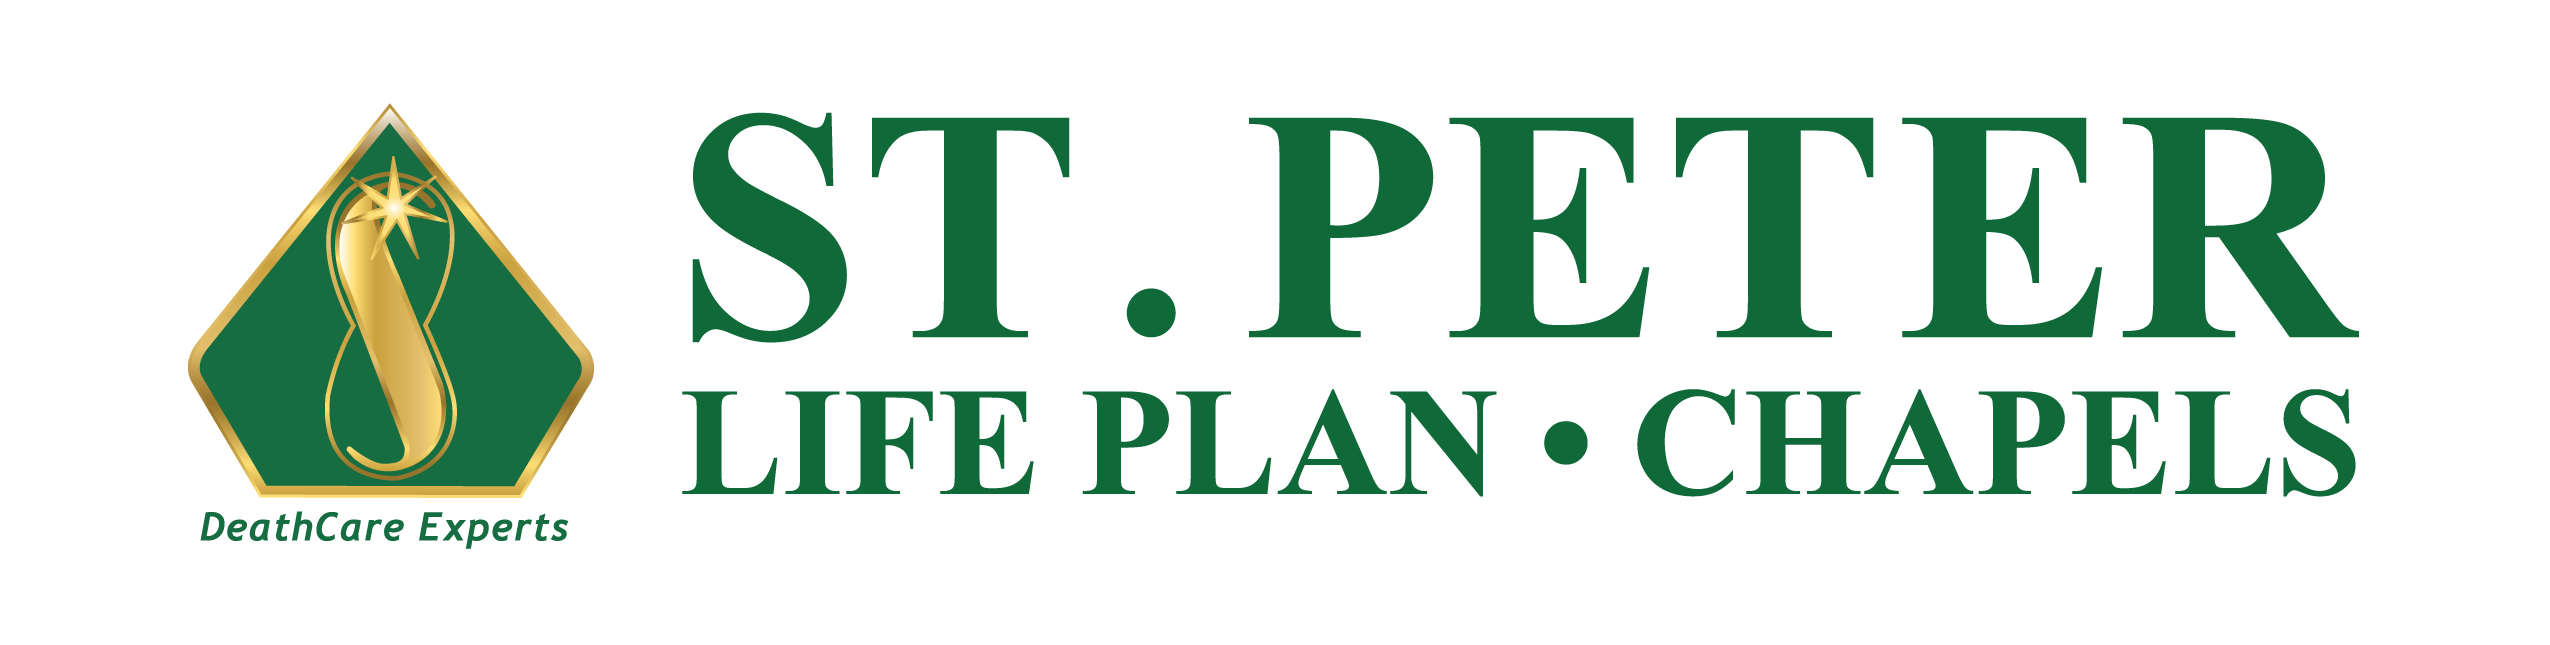 St. Peter Life Plan and Chapels 50th year Logo